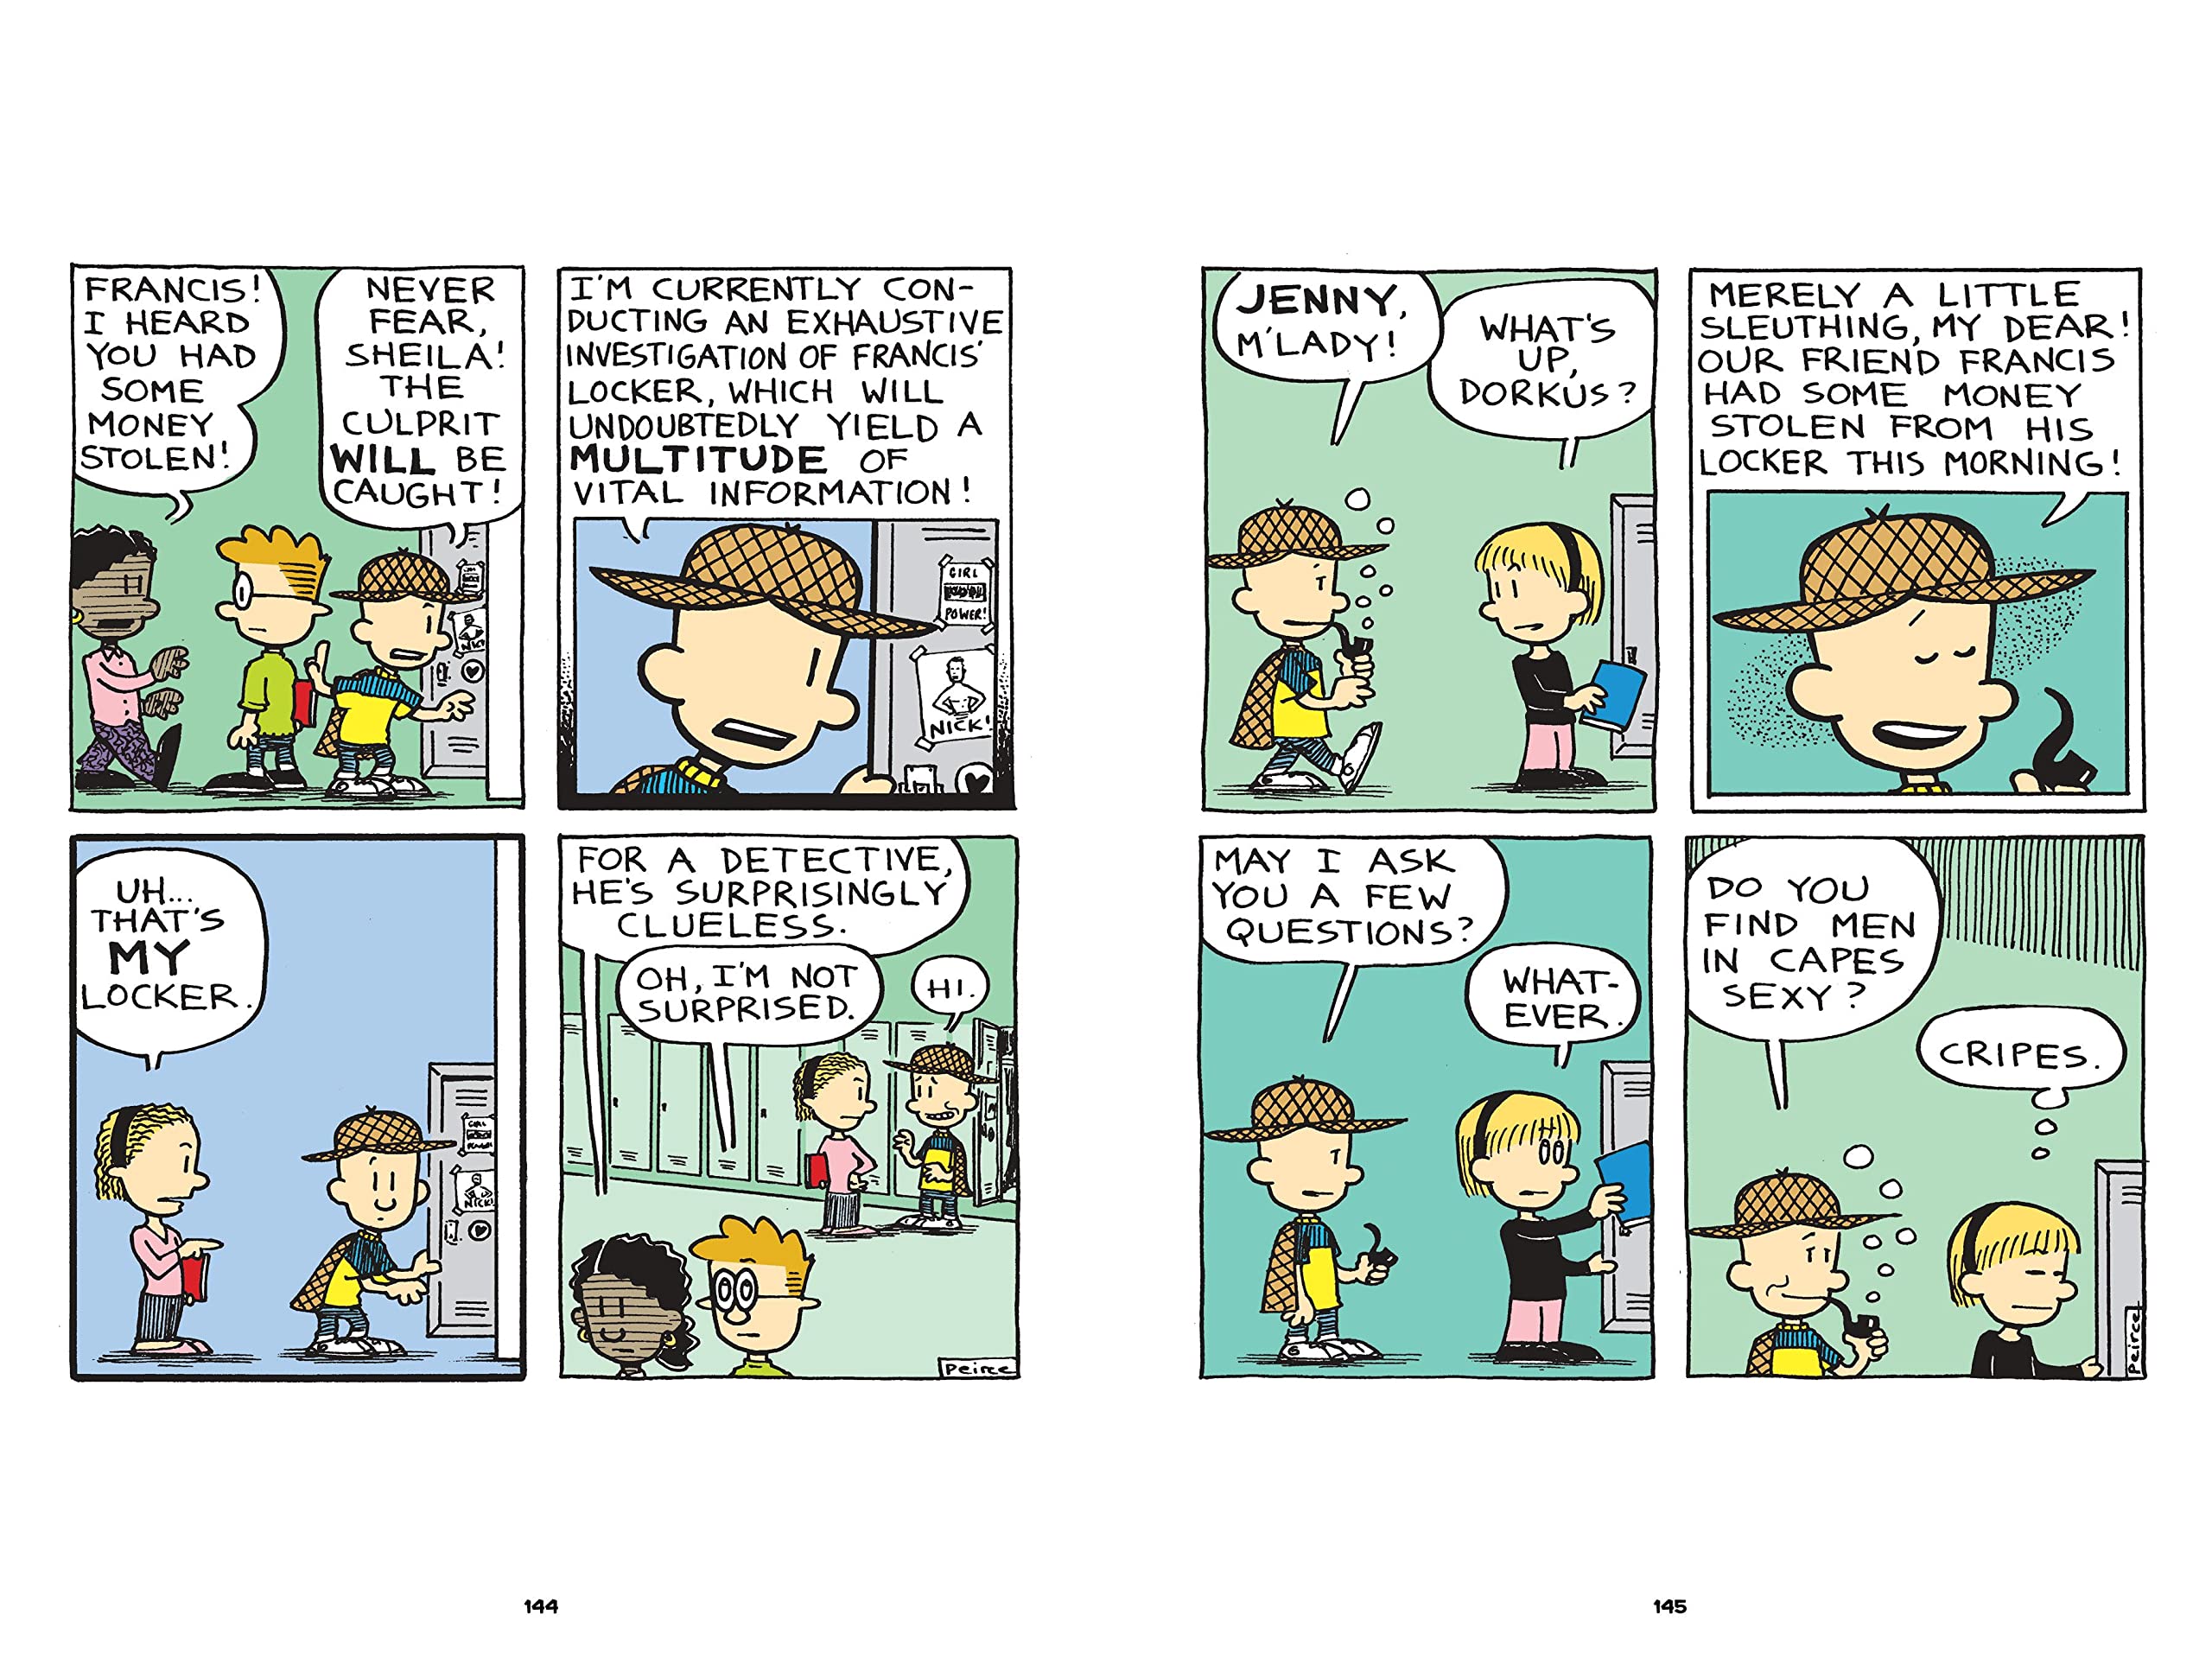 Big Nate: From the Top (Volume 1)